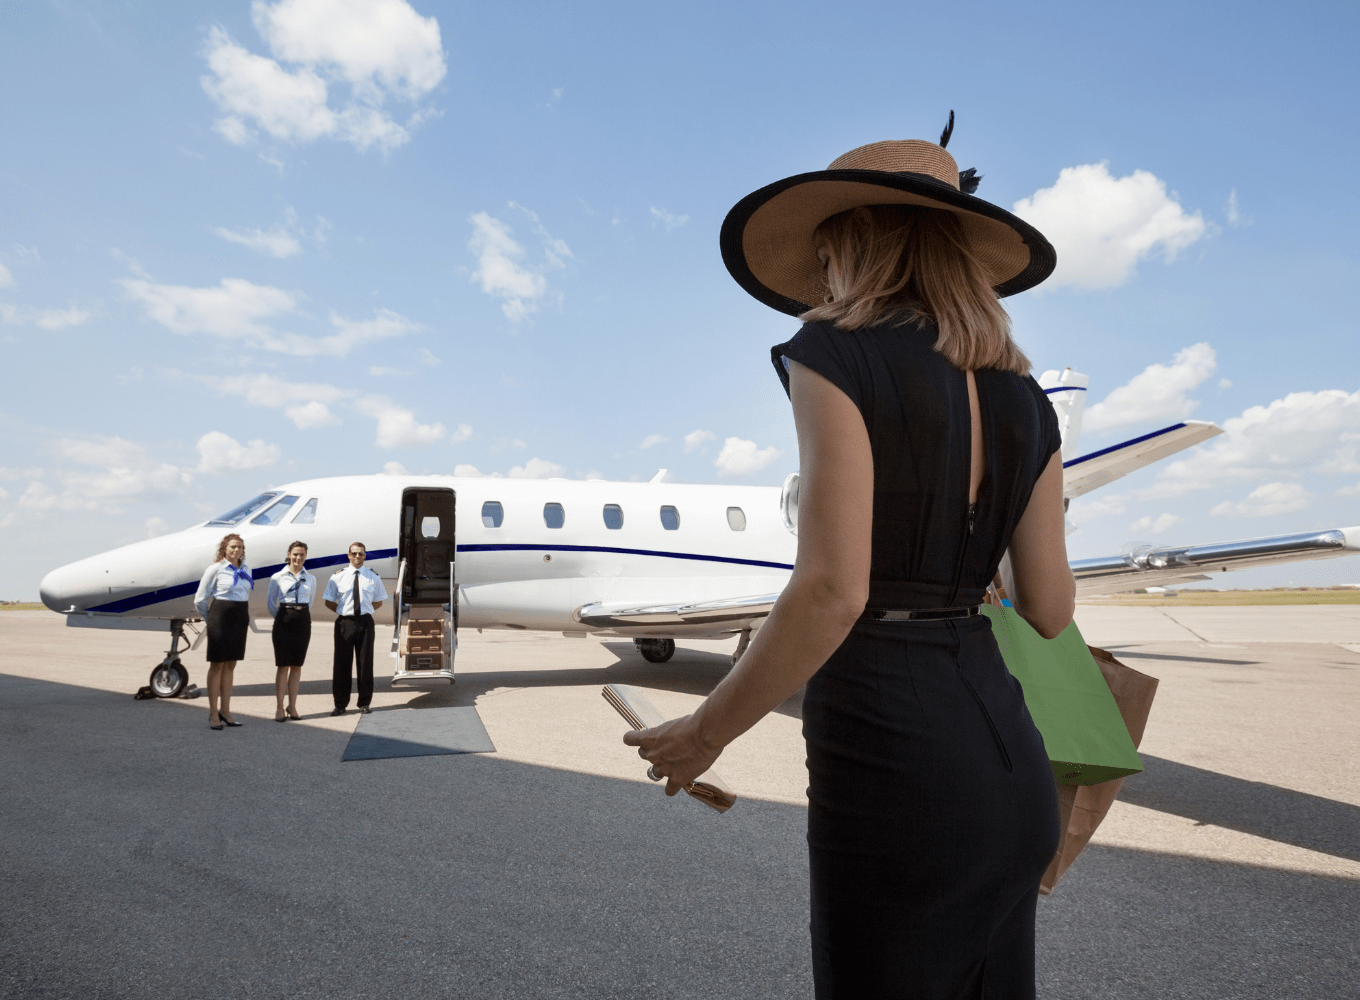 Flying on a Private Jet: Why It's Better Than Commercial Flights. Private jets offer a level of flexibility that commercial flights cannot match